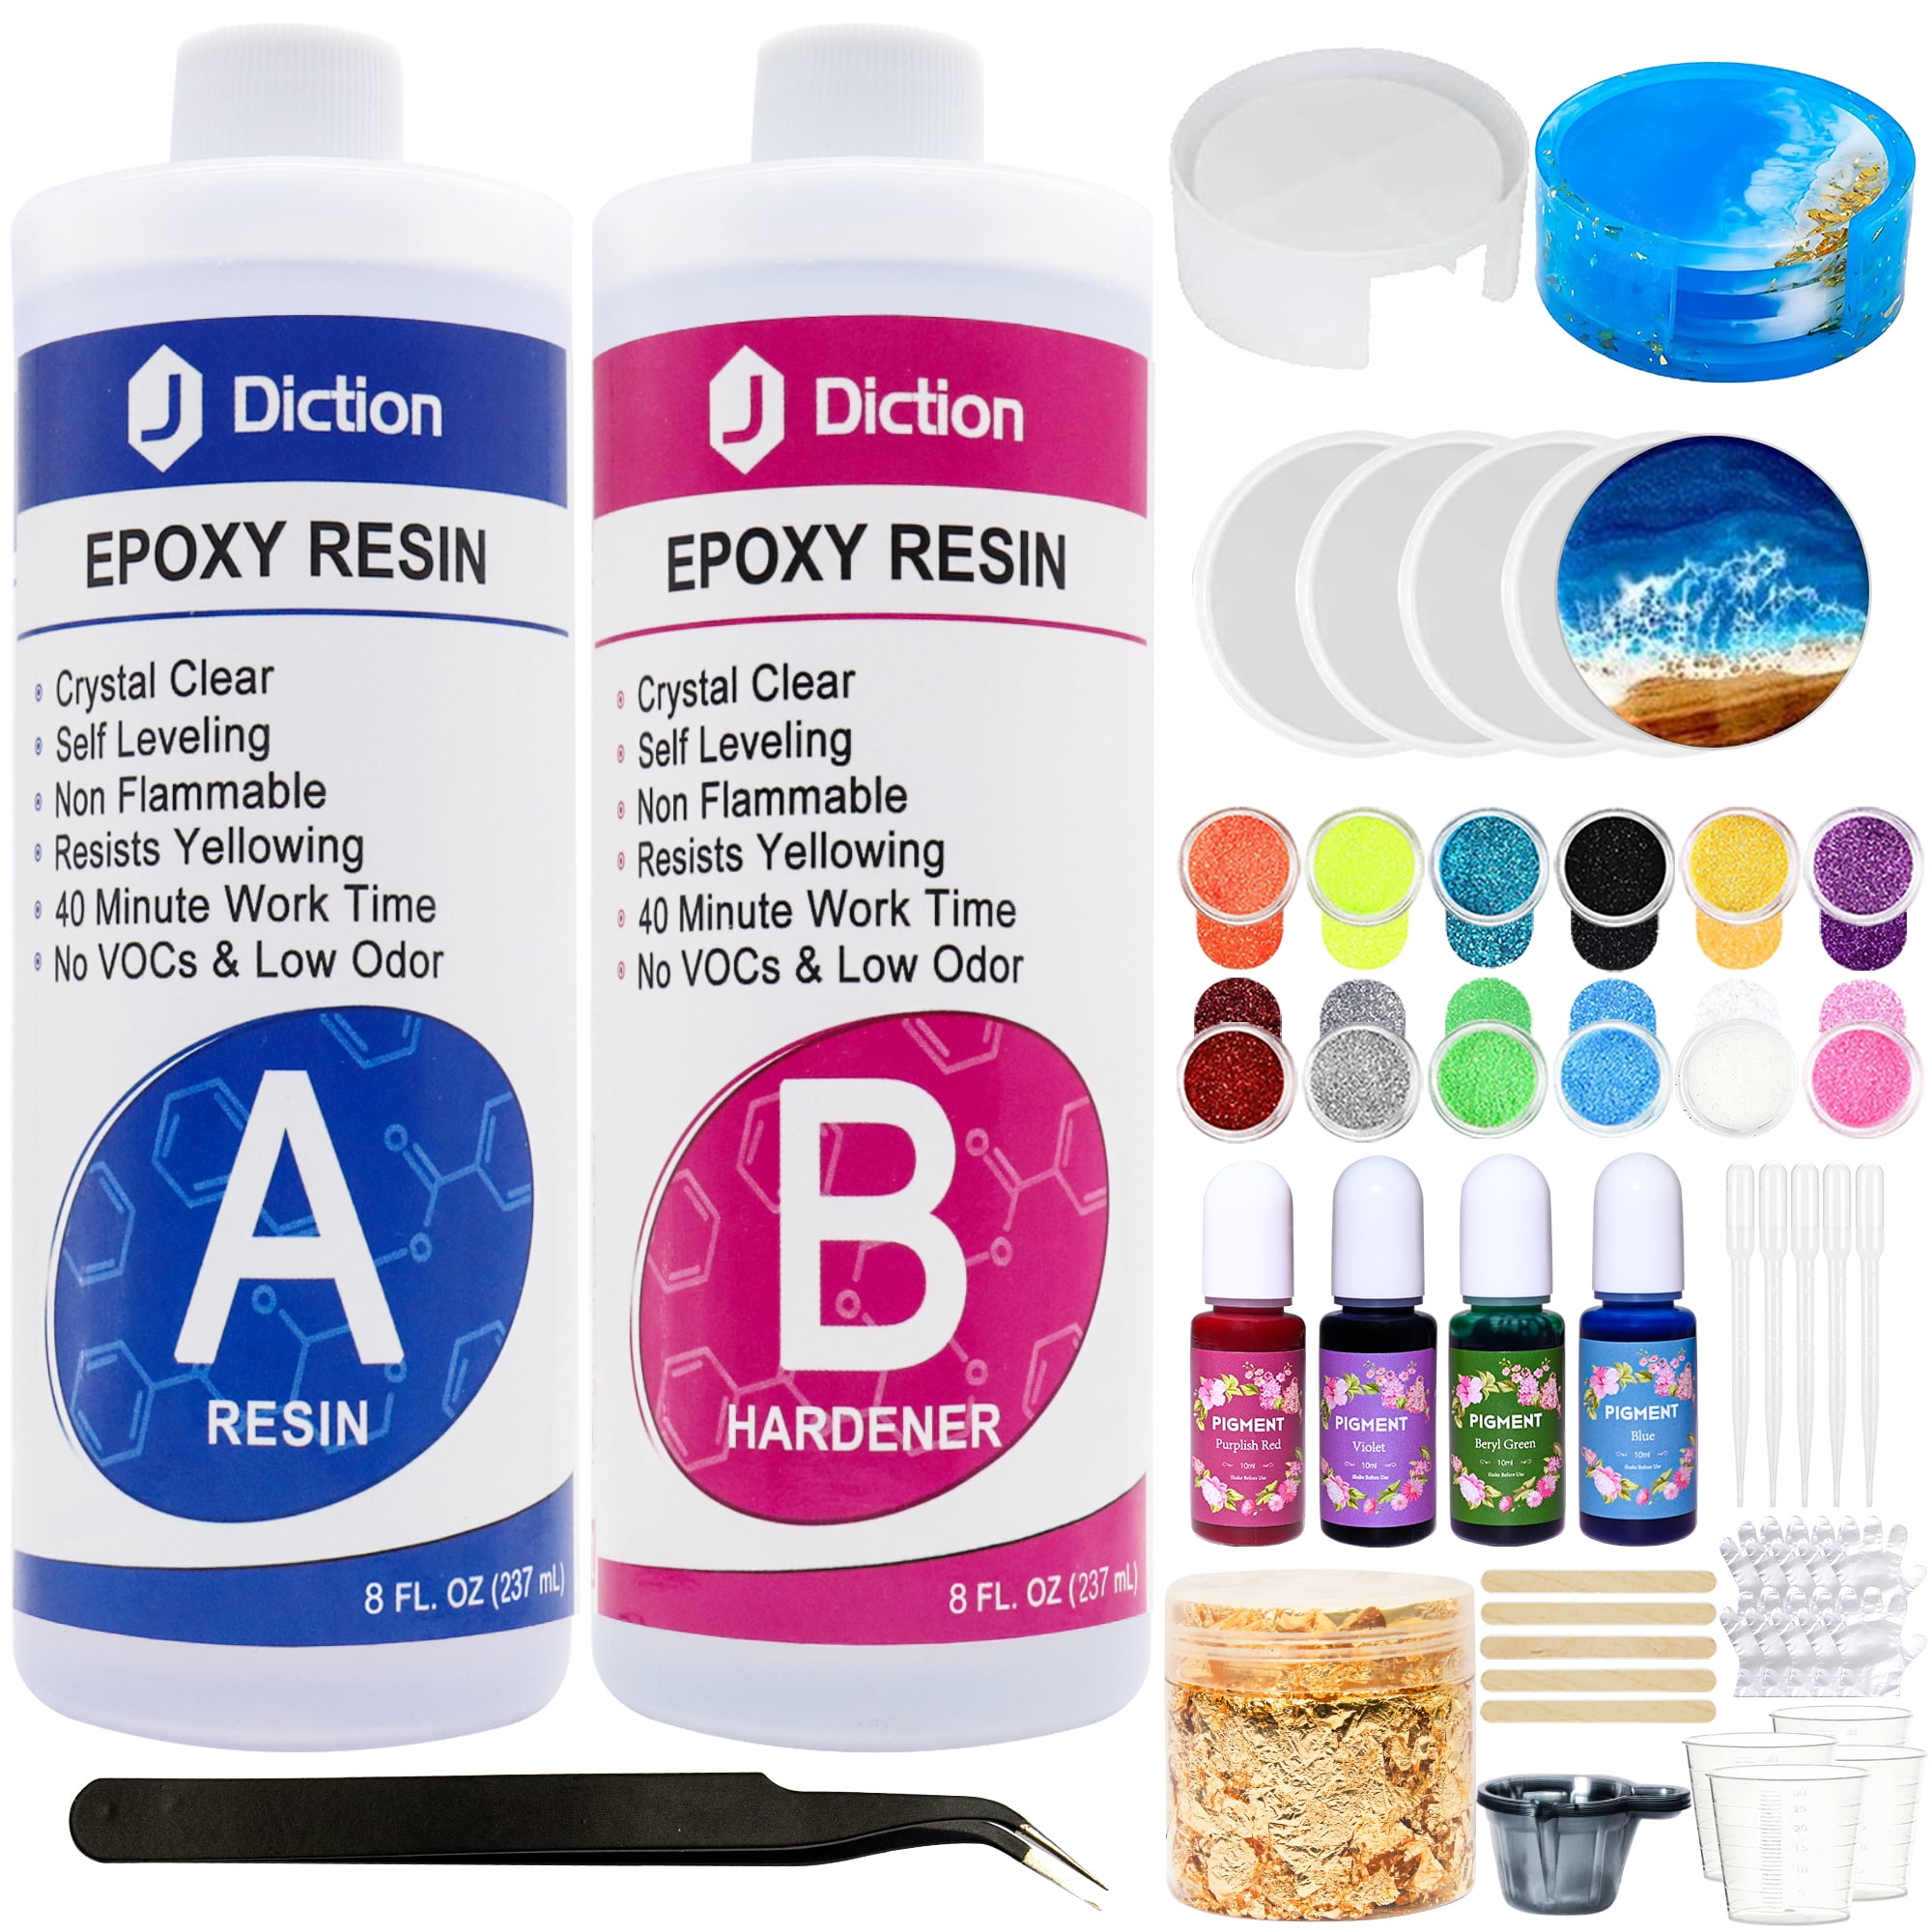 Epoxy Resin Clearly Creative Starter Kits for Hobby and Craft